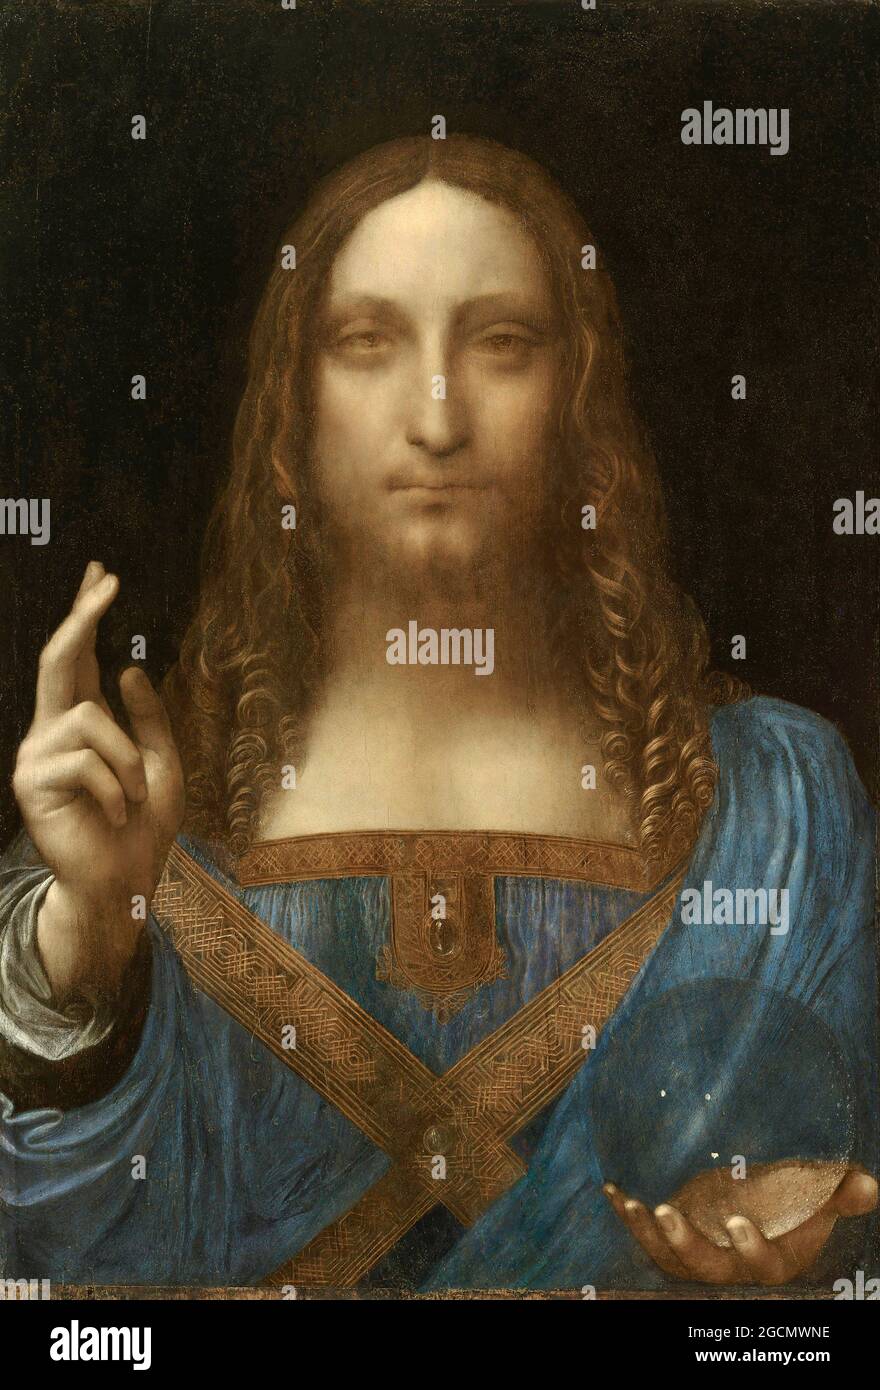 Salvator Mundi is a painting attributed in whole or in part to the Italian High Renaissance artist Leonardo da Vinci, dated to c. 1499–1510. Stock Photo